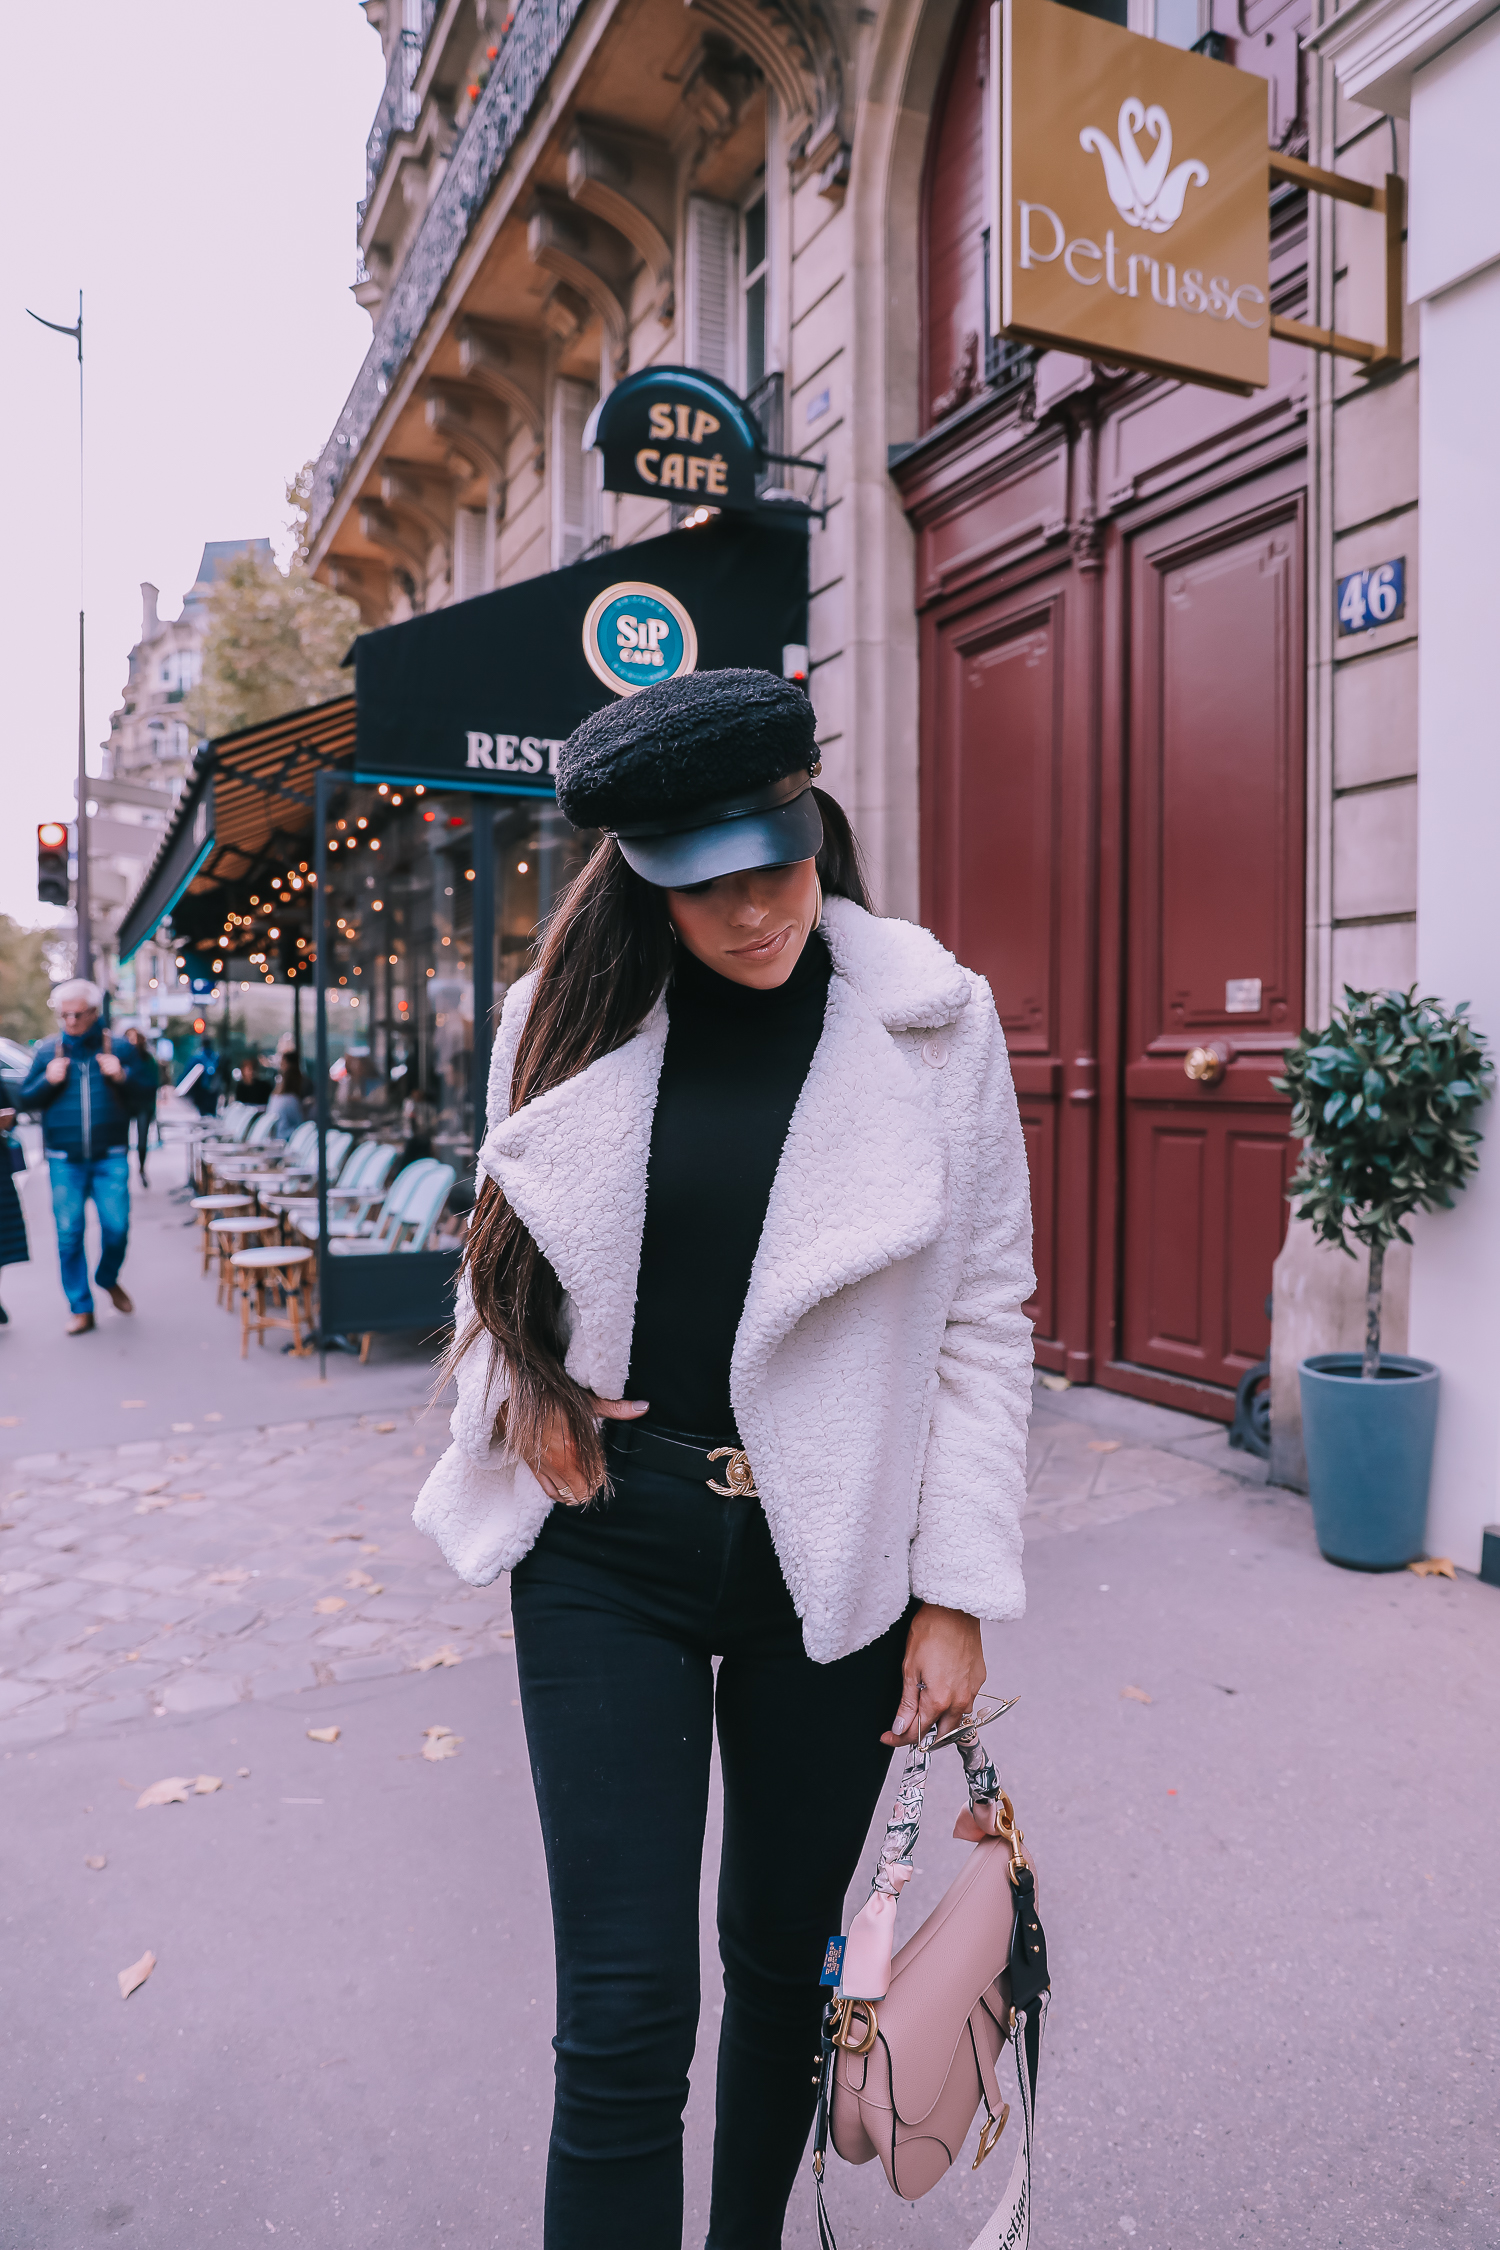 Ivory Peacoat styled by top US fashion blog, The Sweetest Thing: image of a woman wearing a BB Dakota ivory peacoat in Paris. | fall outfit ideas pinterest 2019, paris fall outfit ideas, dior saddle bag nude with straps, dior saddle bag blush saddle bag, emily ann gemma-2